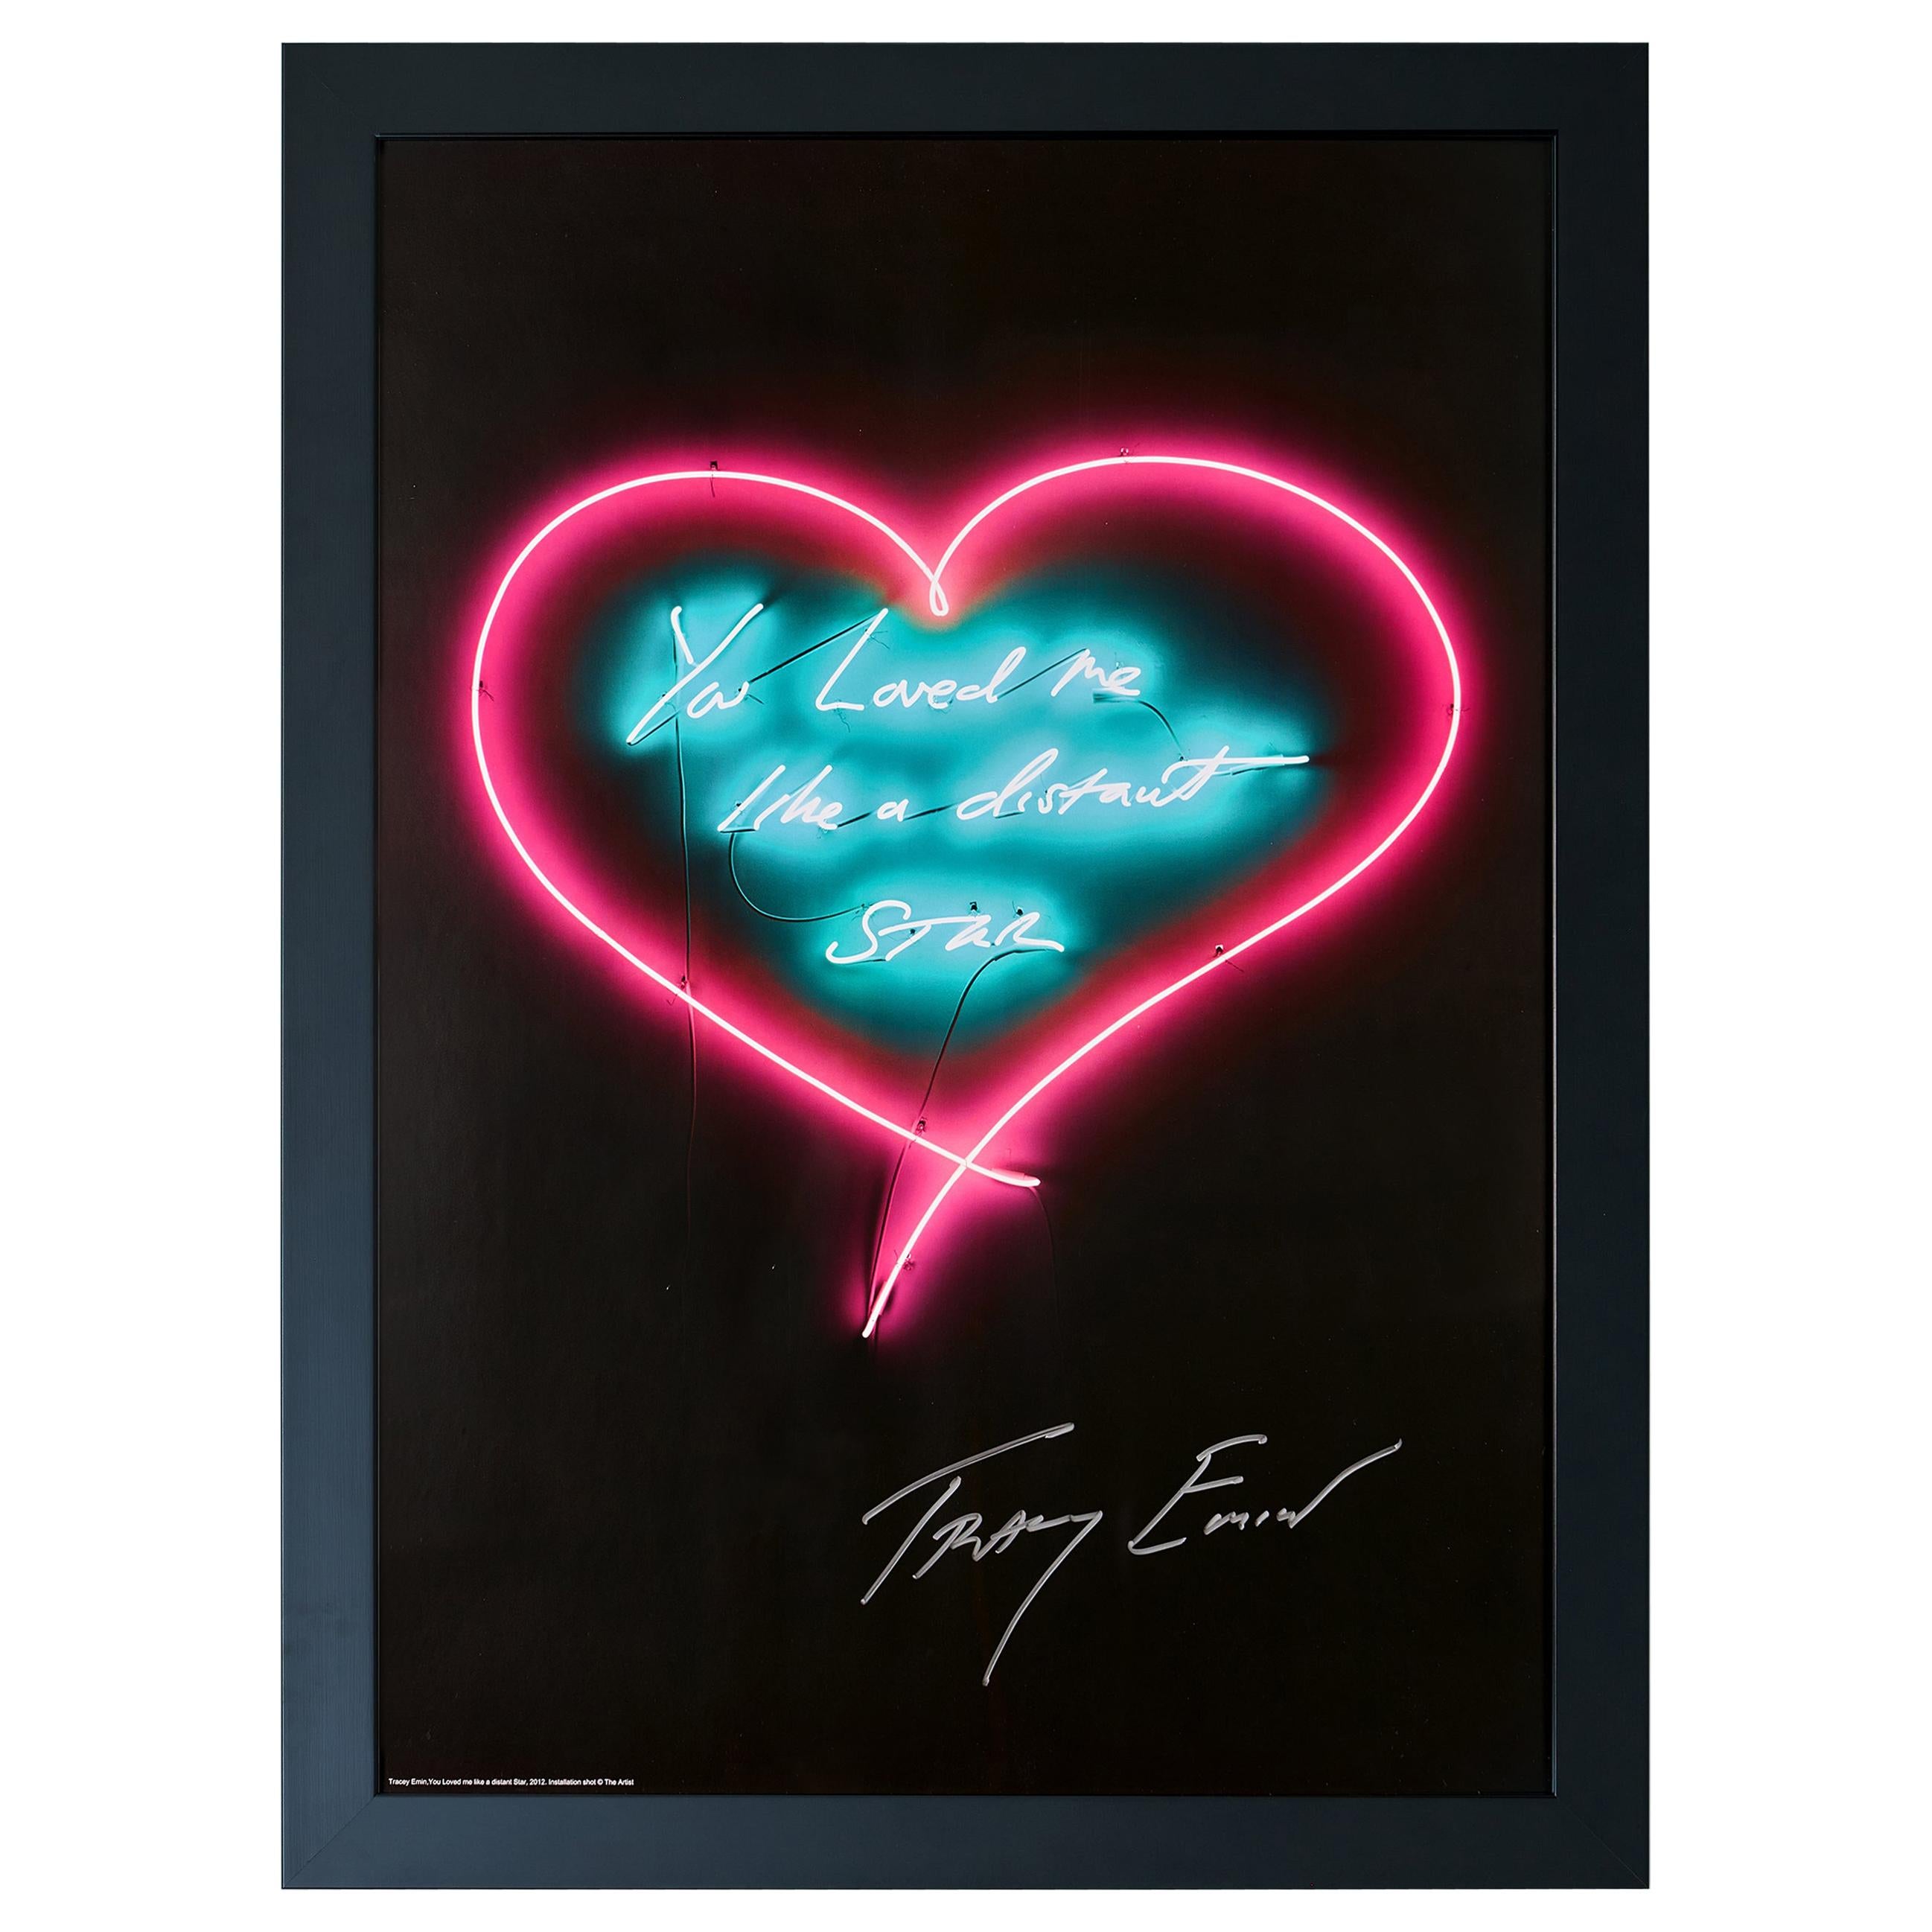 Tracey Emin Lithograph